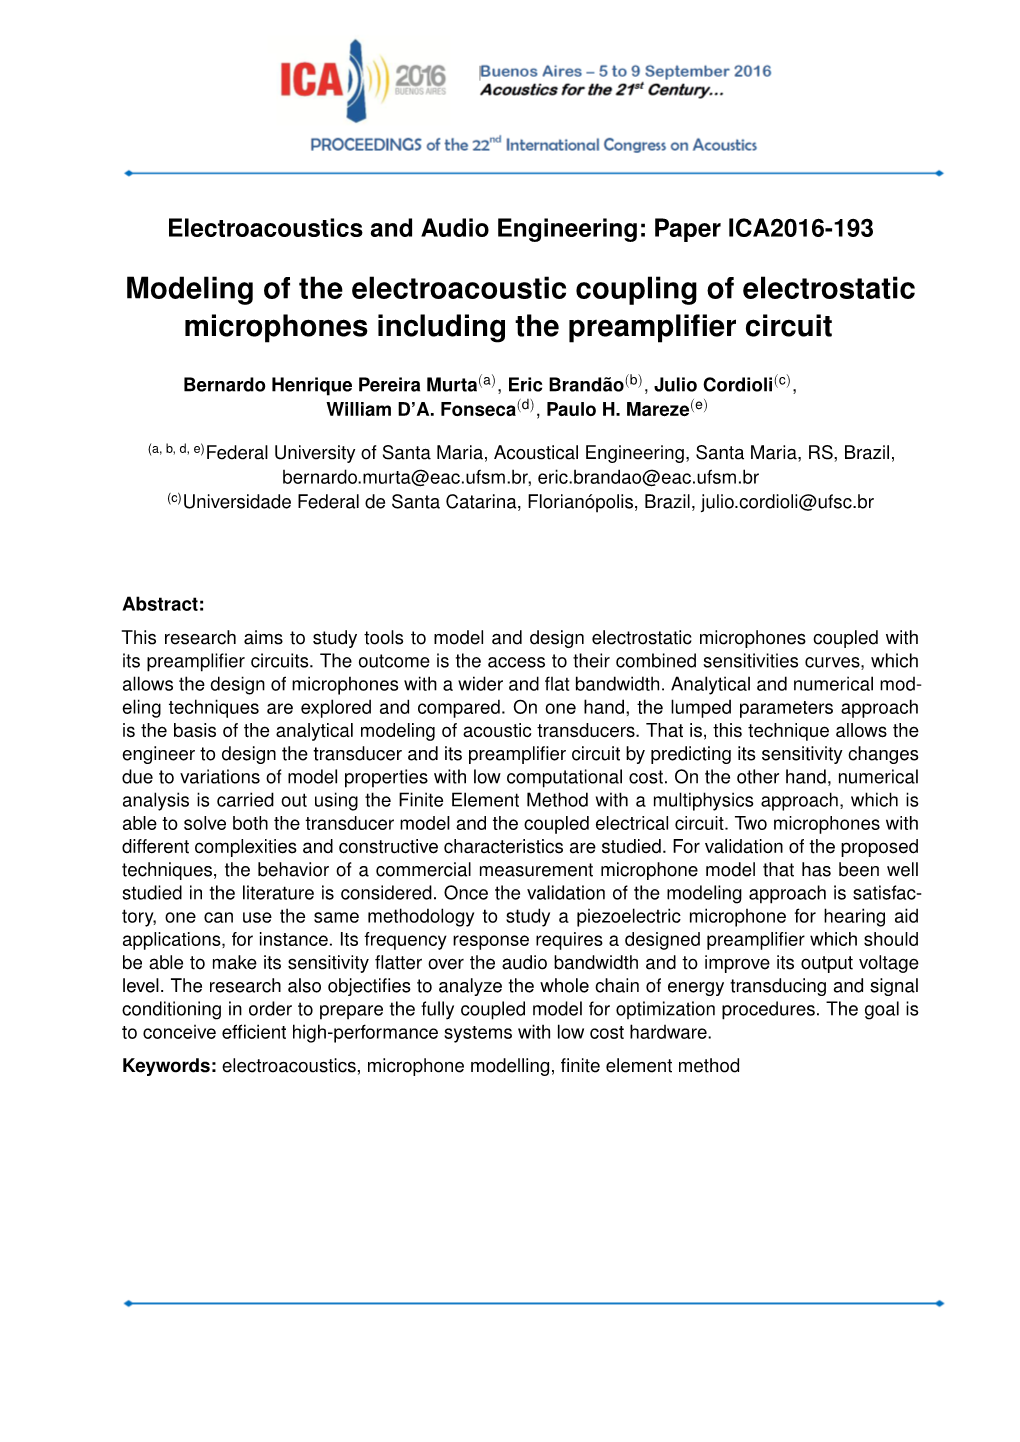 Modeling of the Electroacoustic Coupling of Electrostatic Microphones Including the Preampliﬁer Circuit